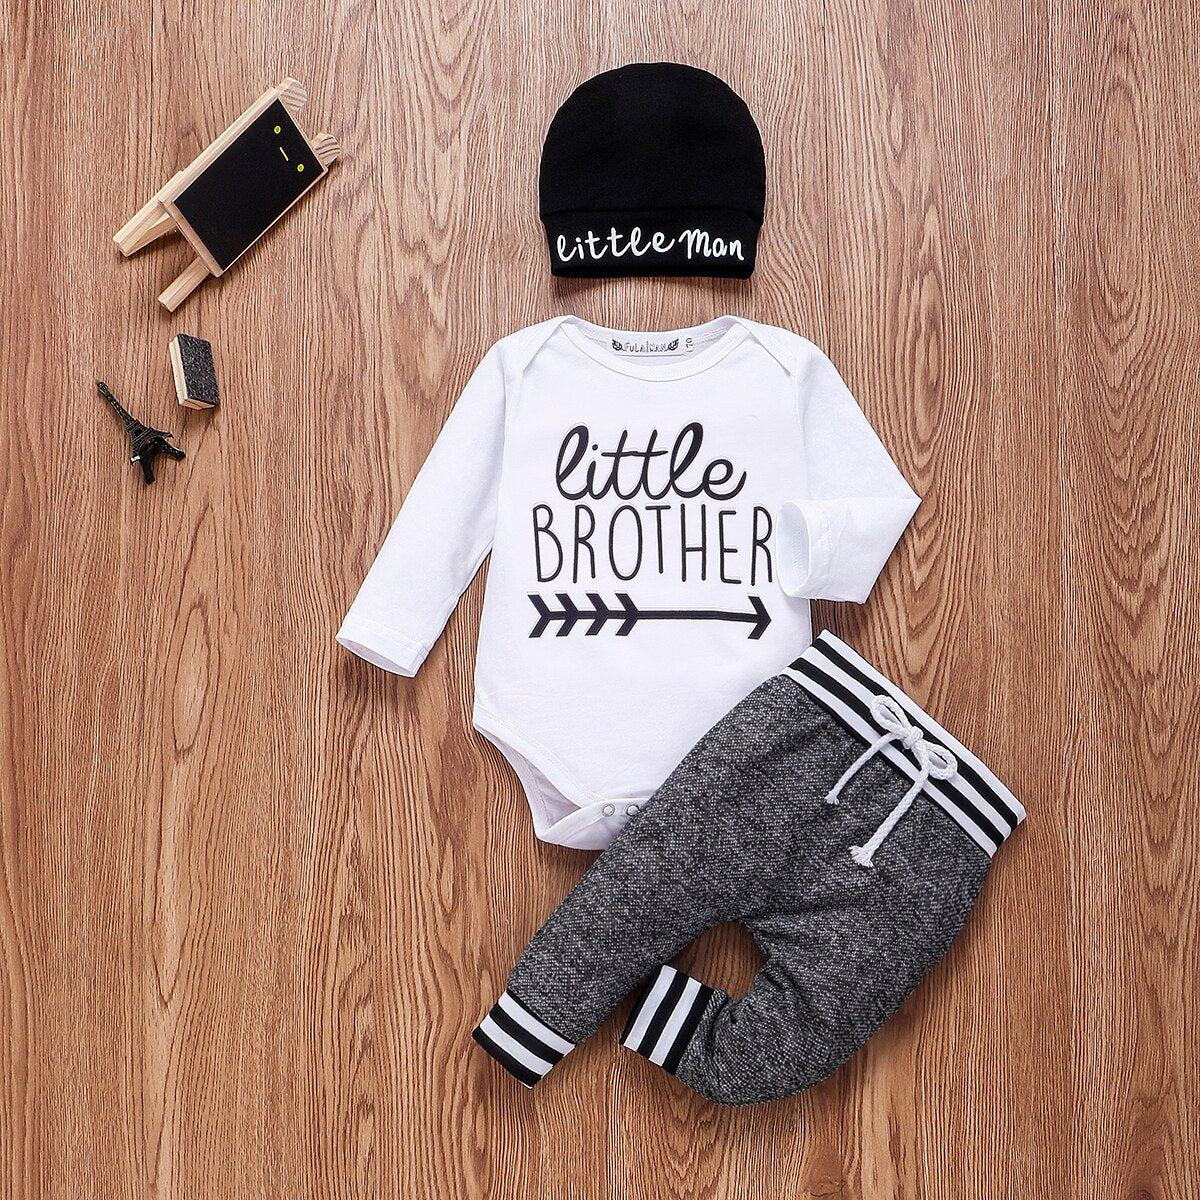 0-18Months Newborn Infant Baby Boy Clothes Cotton Sets Long Sleeve Romper Pant Hats Outfit 3Pcs Baby Warm Clothing